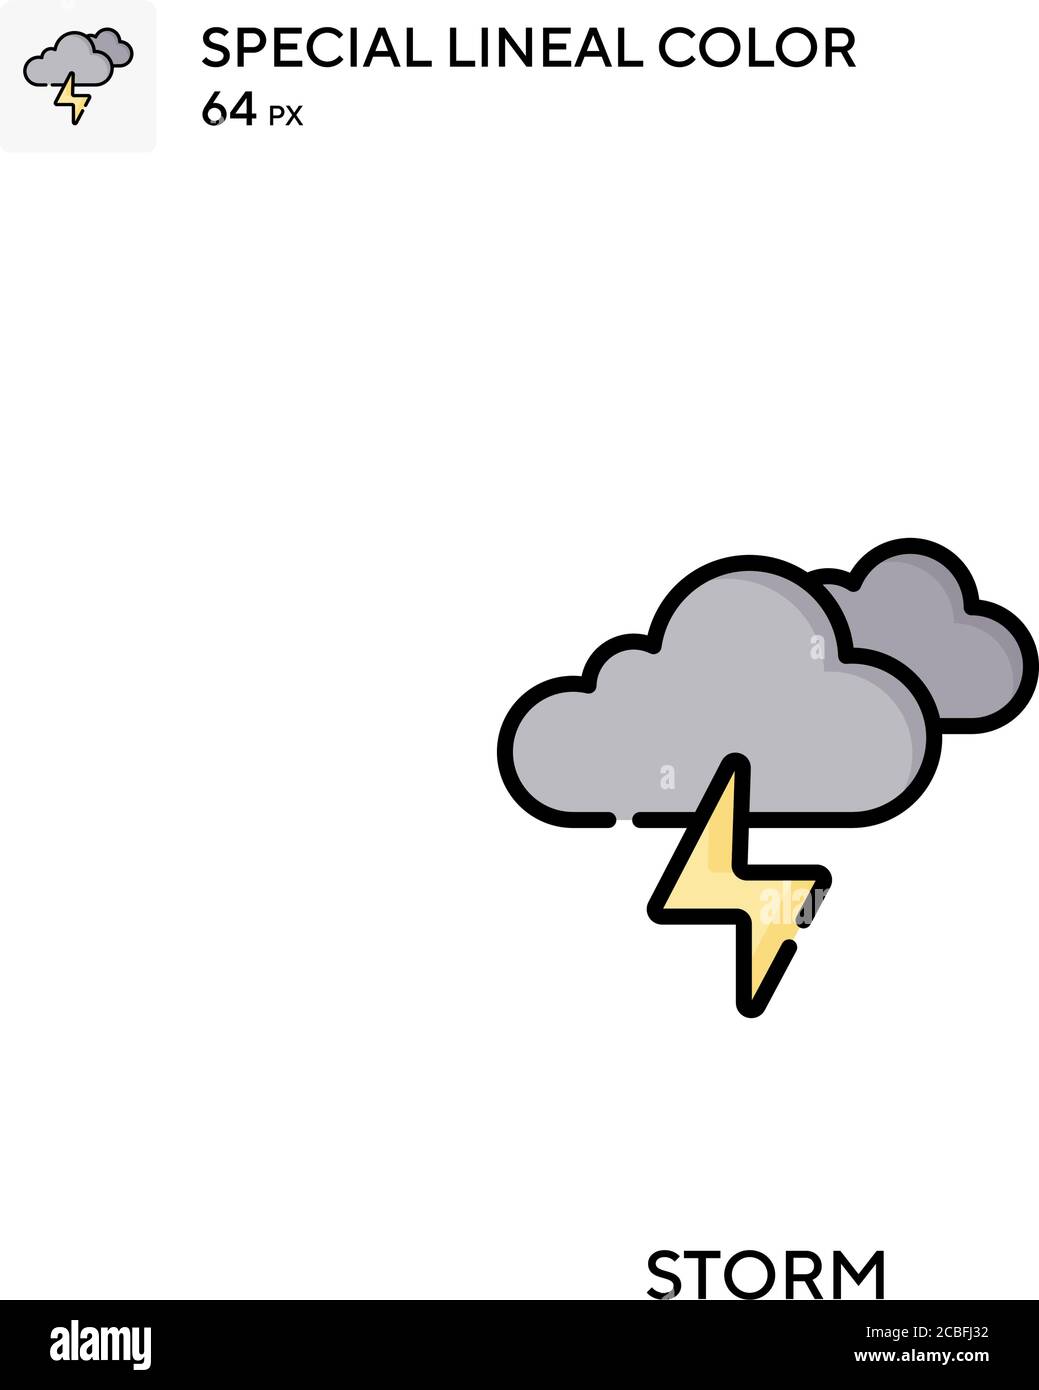 Storm Simple vector icon. Storm icons for your business project Stock Vector